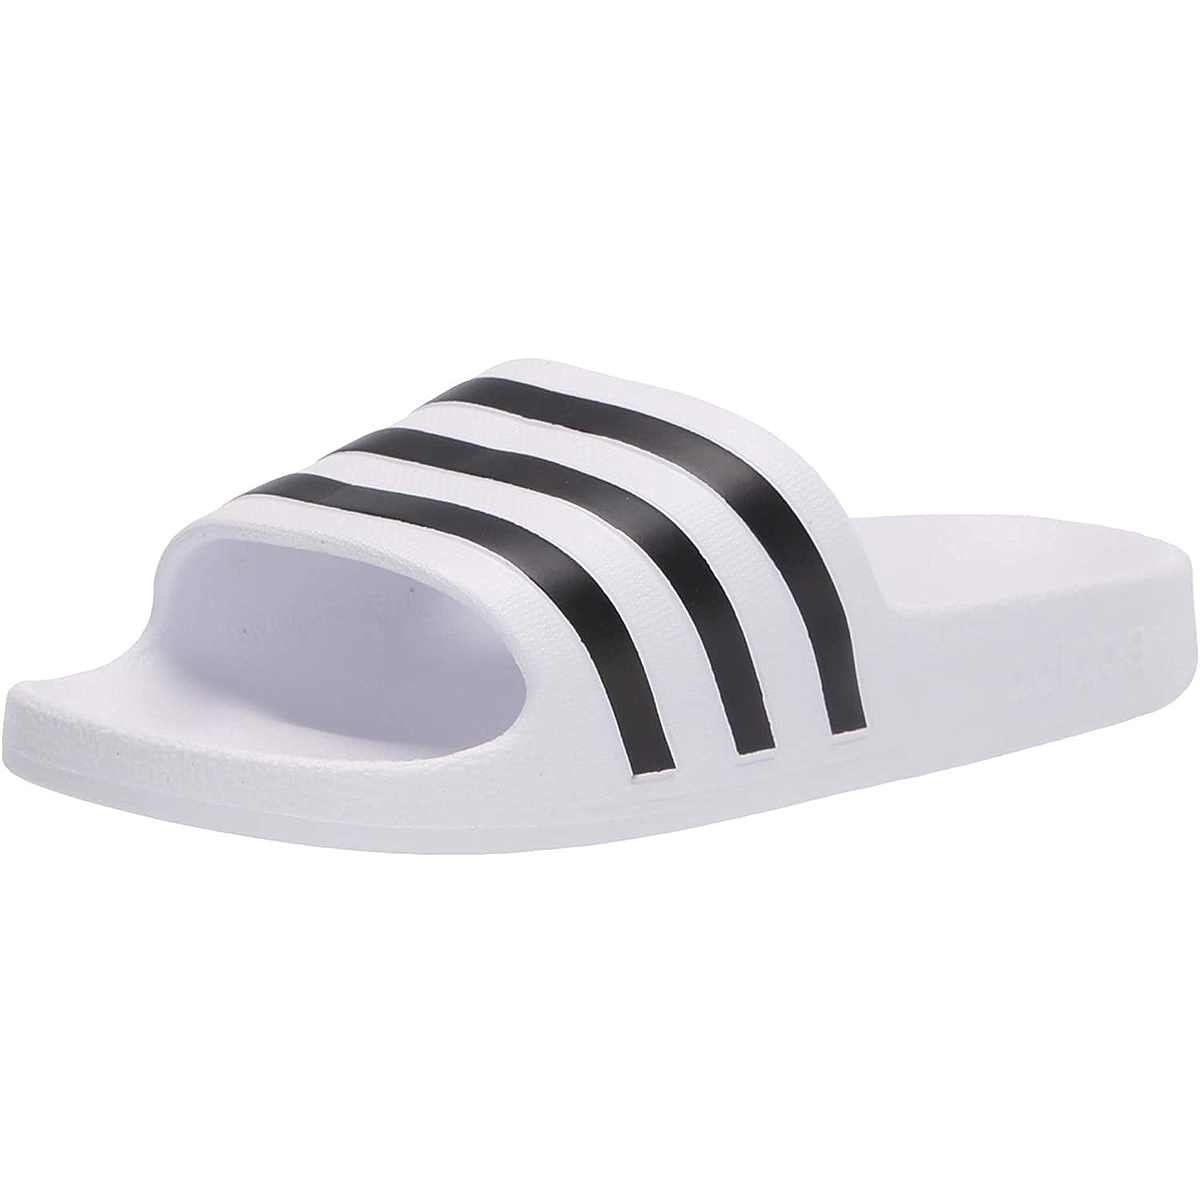 Yeezy-Style Slides on Amazon That Could Save You Hundreds | Us Weekly